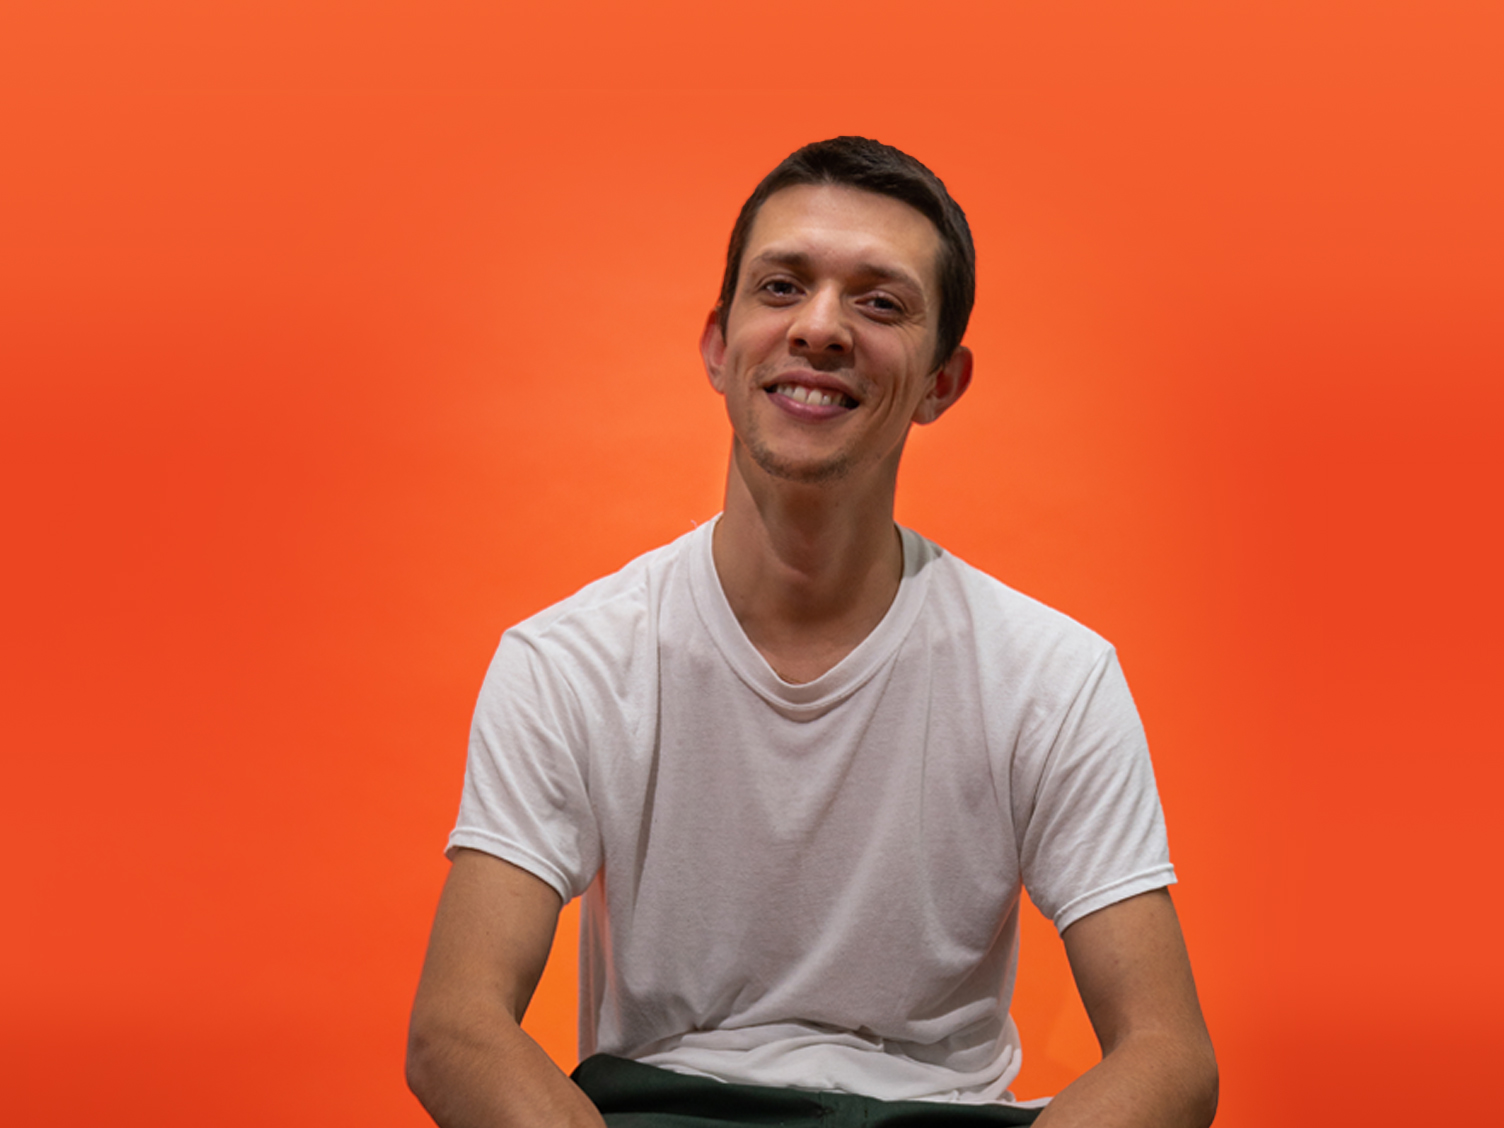 Philippe, Paid Media Specialist at SOUNDBOKS in front of a Orange Background.